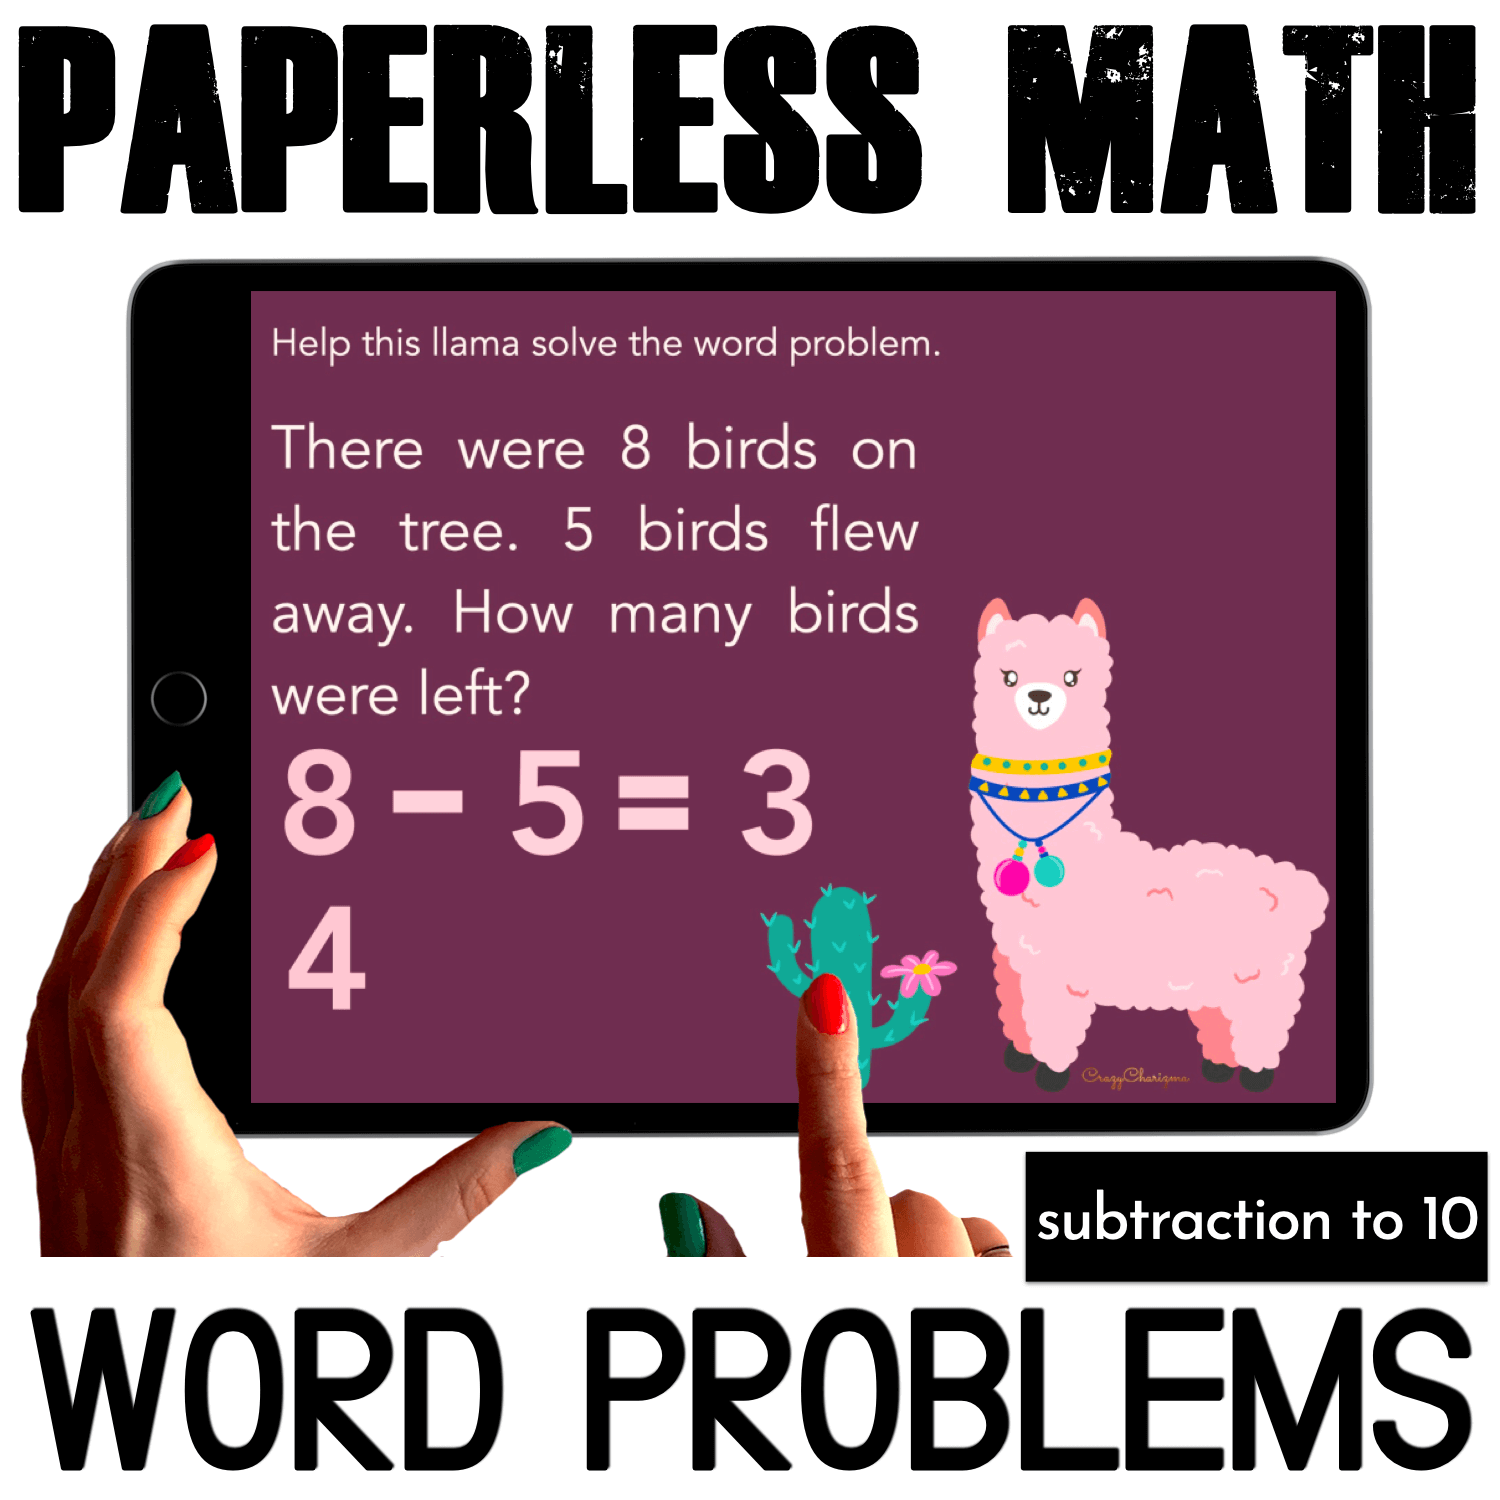 Need engaging subtraction word problems? Have fun with this Google Slides set. Perfect to use for centers, assessment, independent practice, early finishers, homework, group work, as well as during distance learning or hybrid.